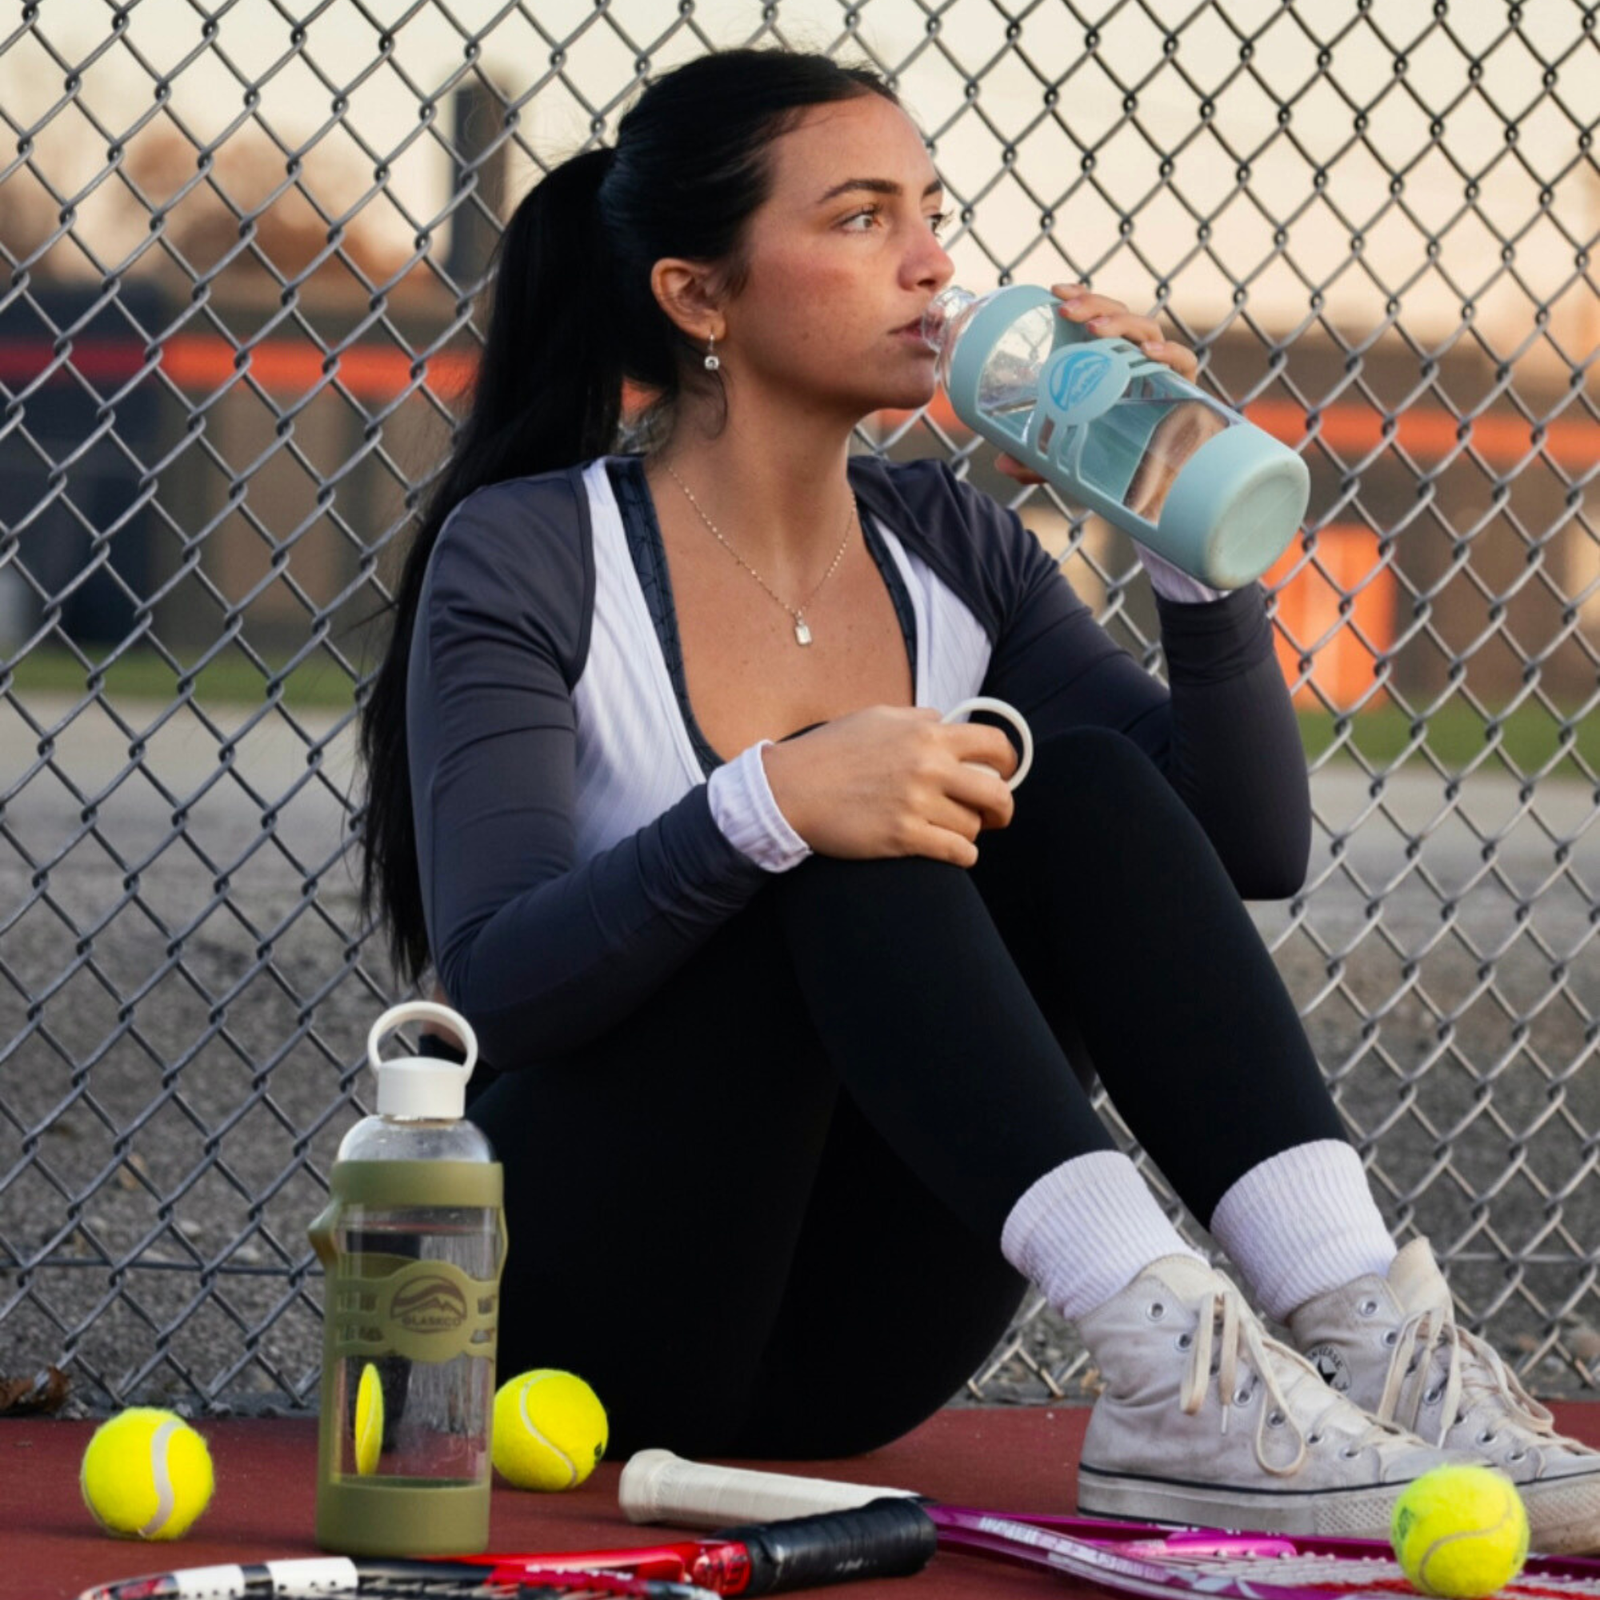 A woman is drinking from a Columbia Blue Glaskco glass water bottle while resting on a tennis court, with an Army Green Glaskco bottle, tennis balls, and a racket in the foreground.